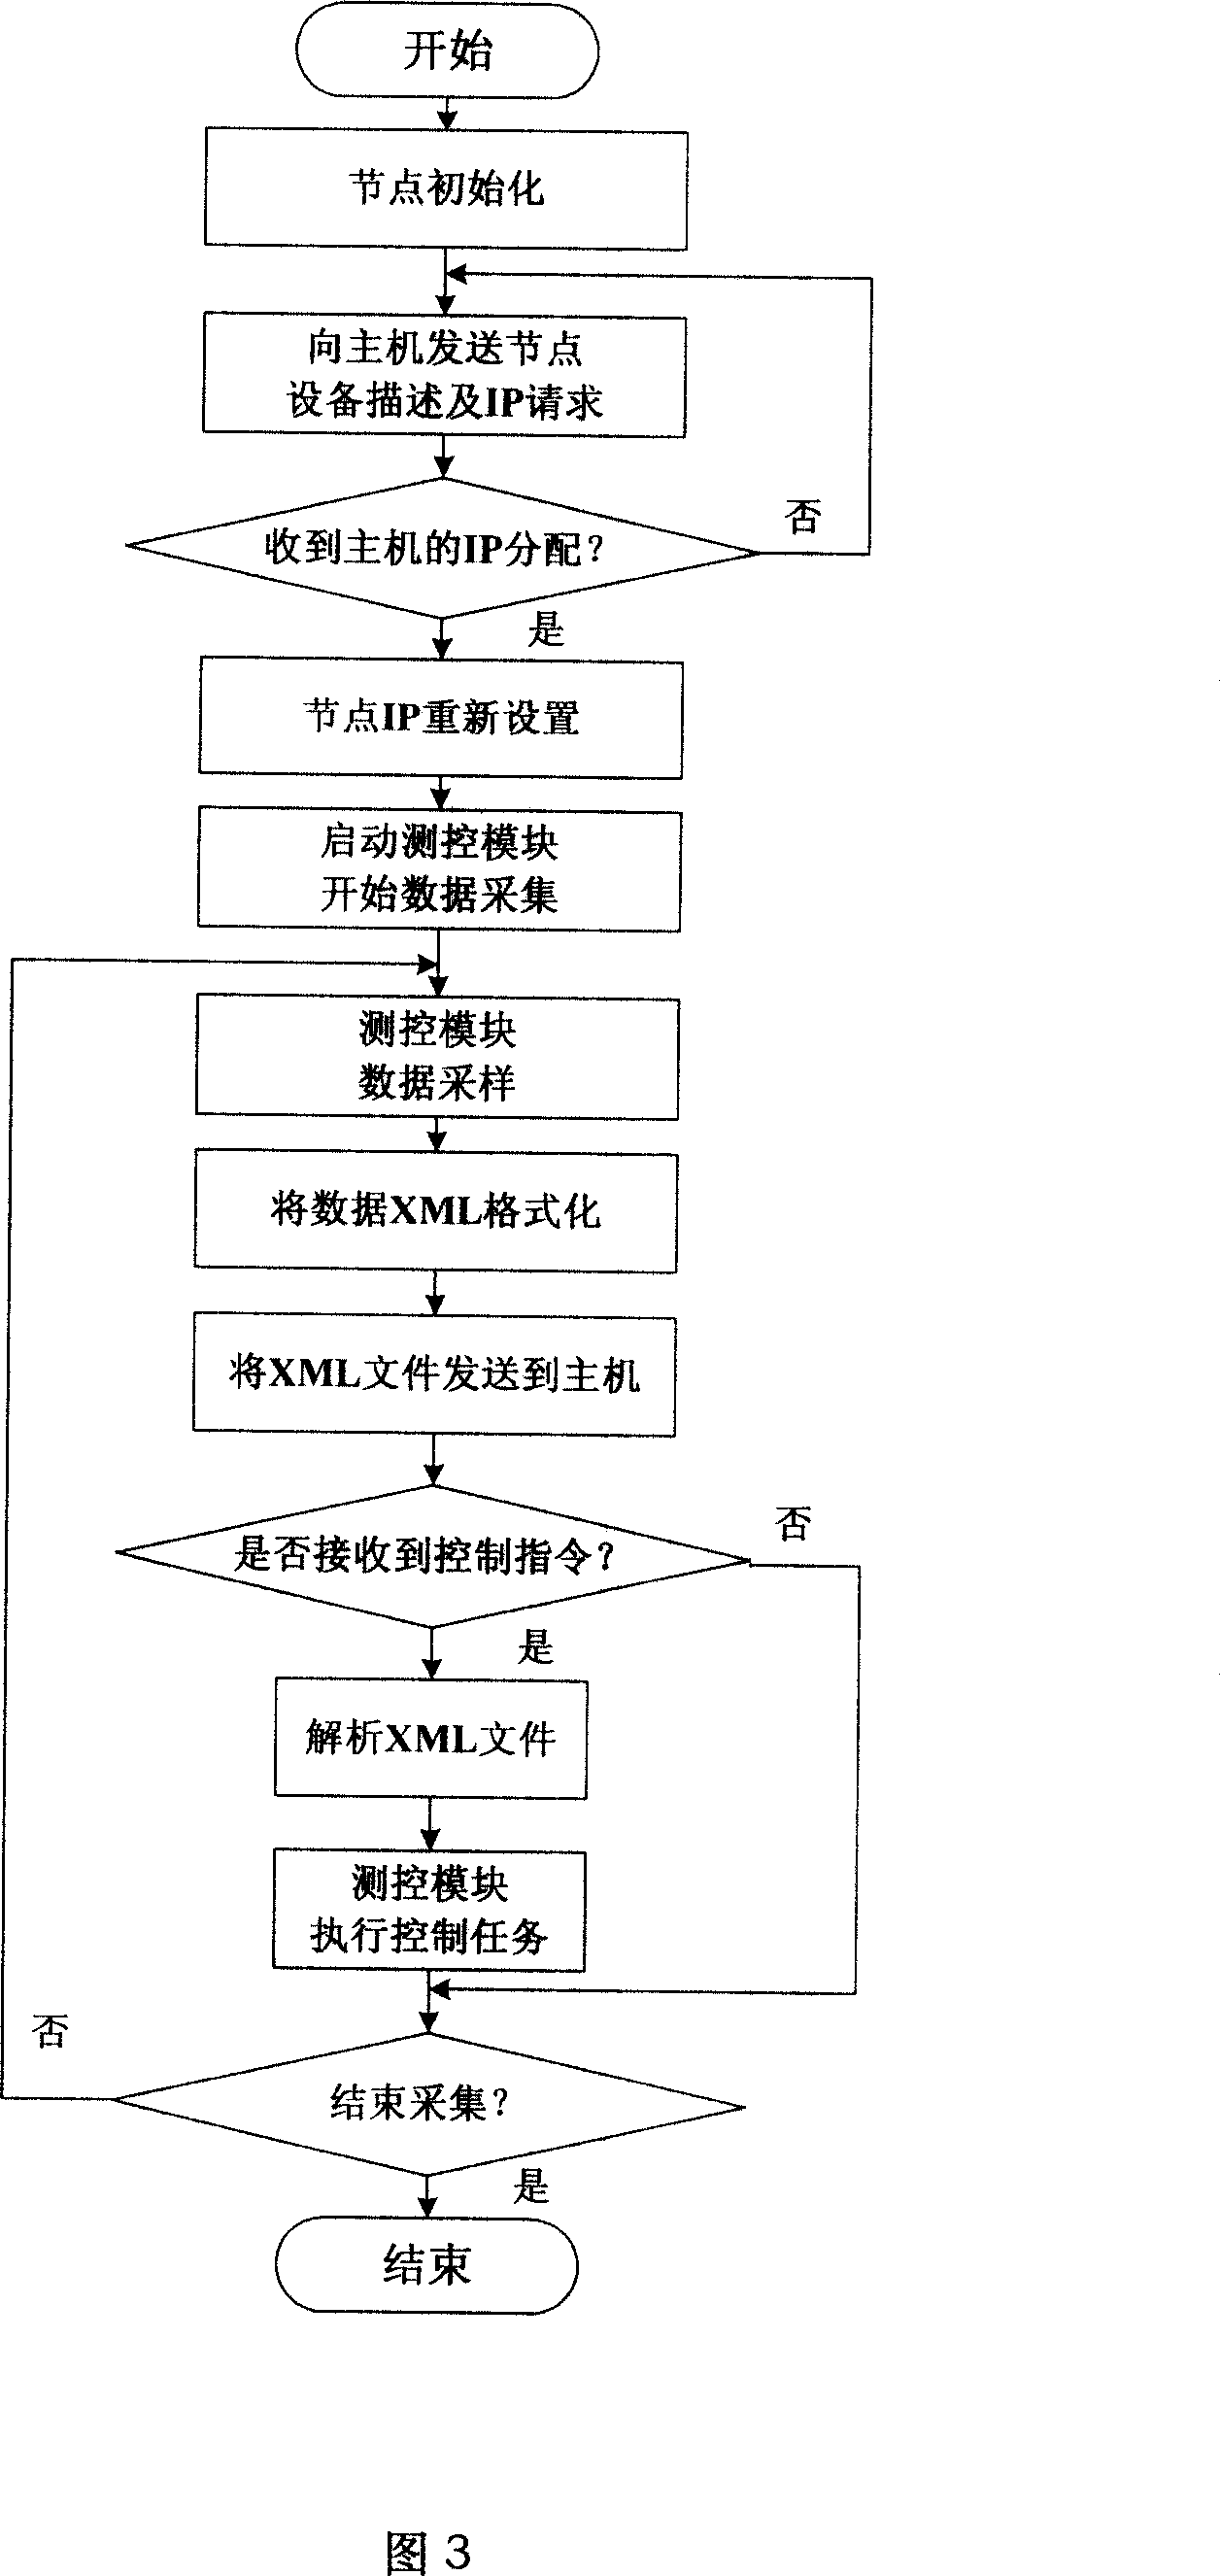 Distributed network plug-and-play measurement and control system